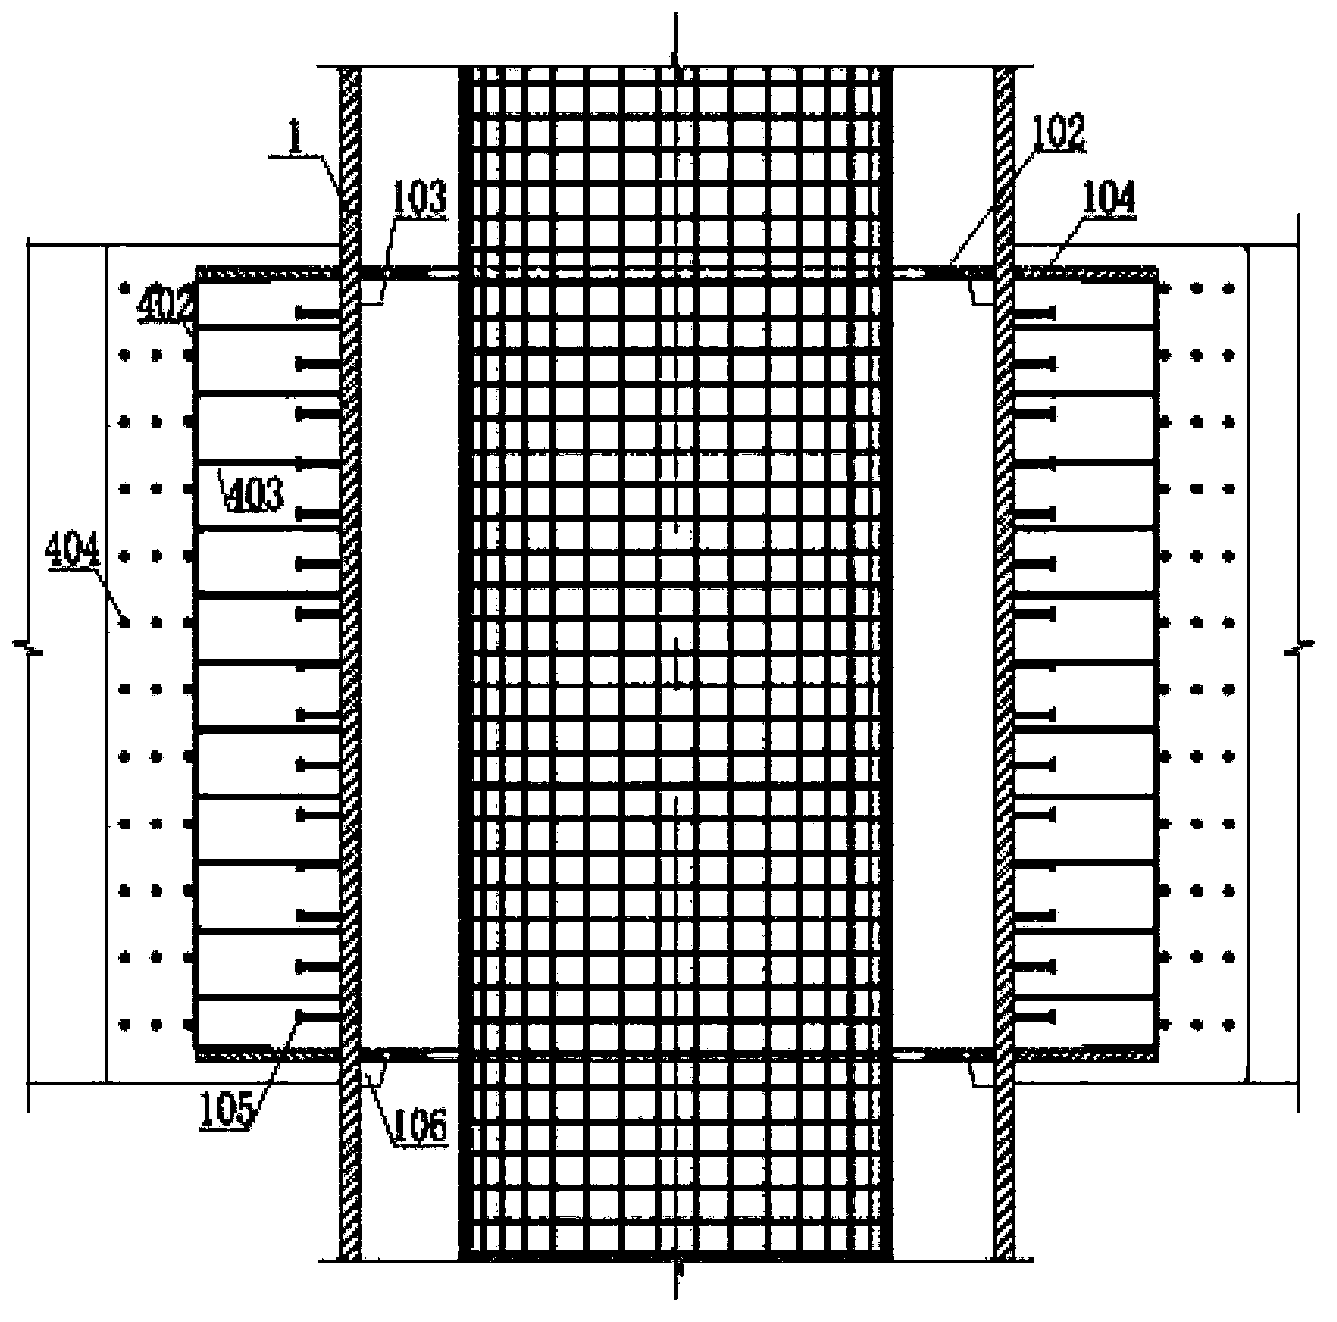 Top layer joint connecting structure of concrete-filled steel tubular column and reinforced concrete beams